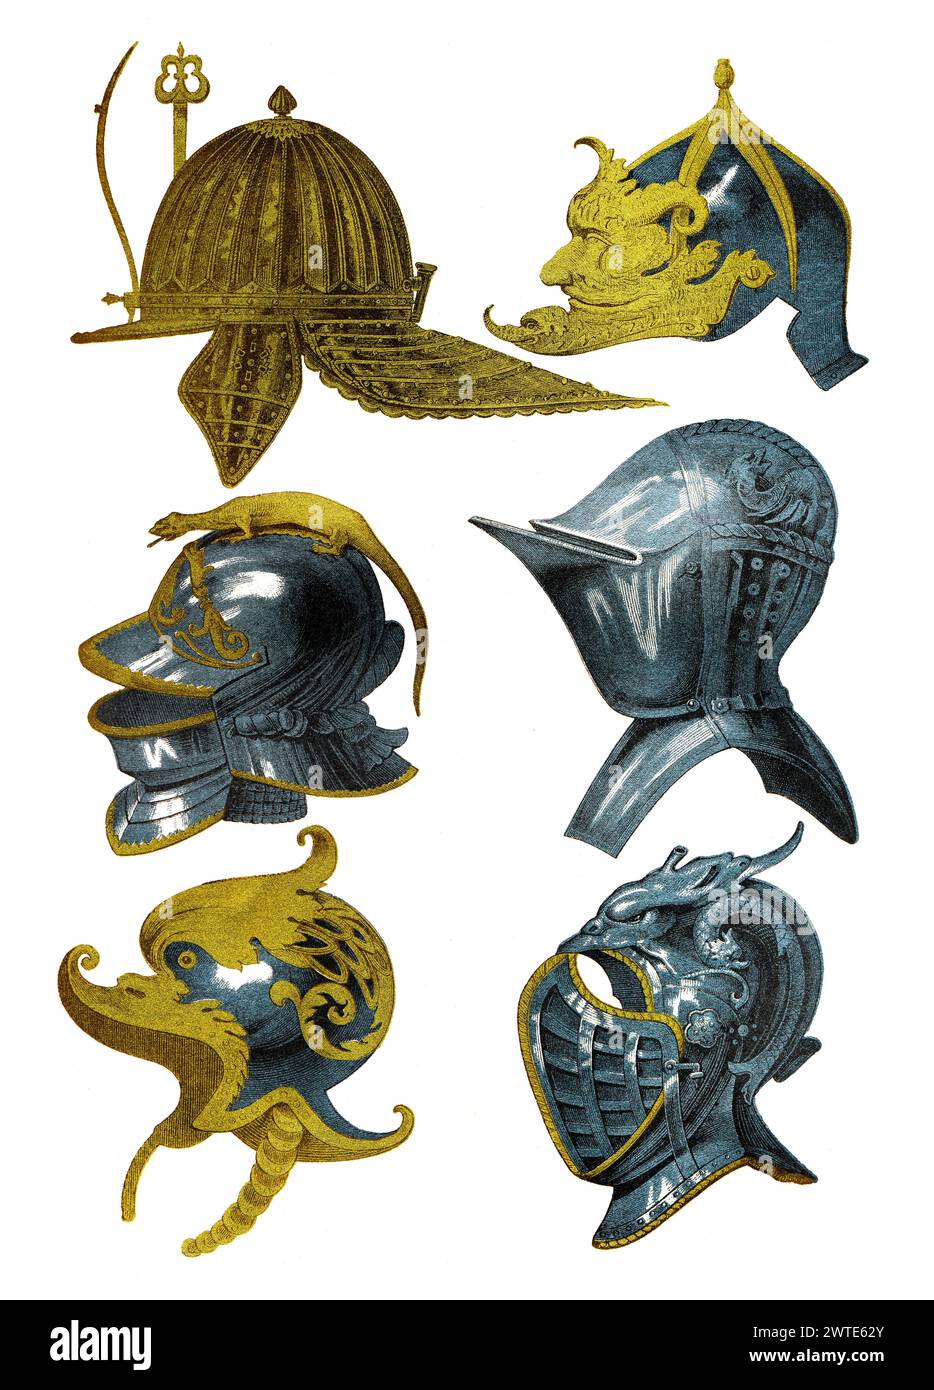 Helmets of the Middle Ages Stock Photo